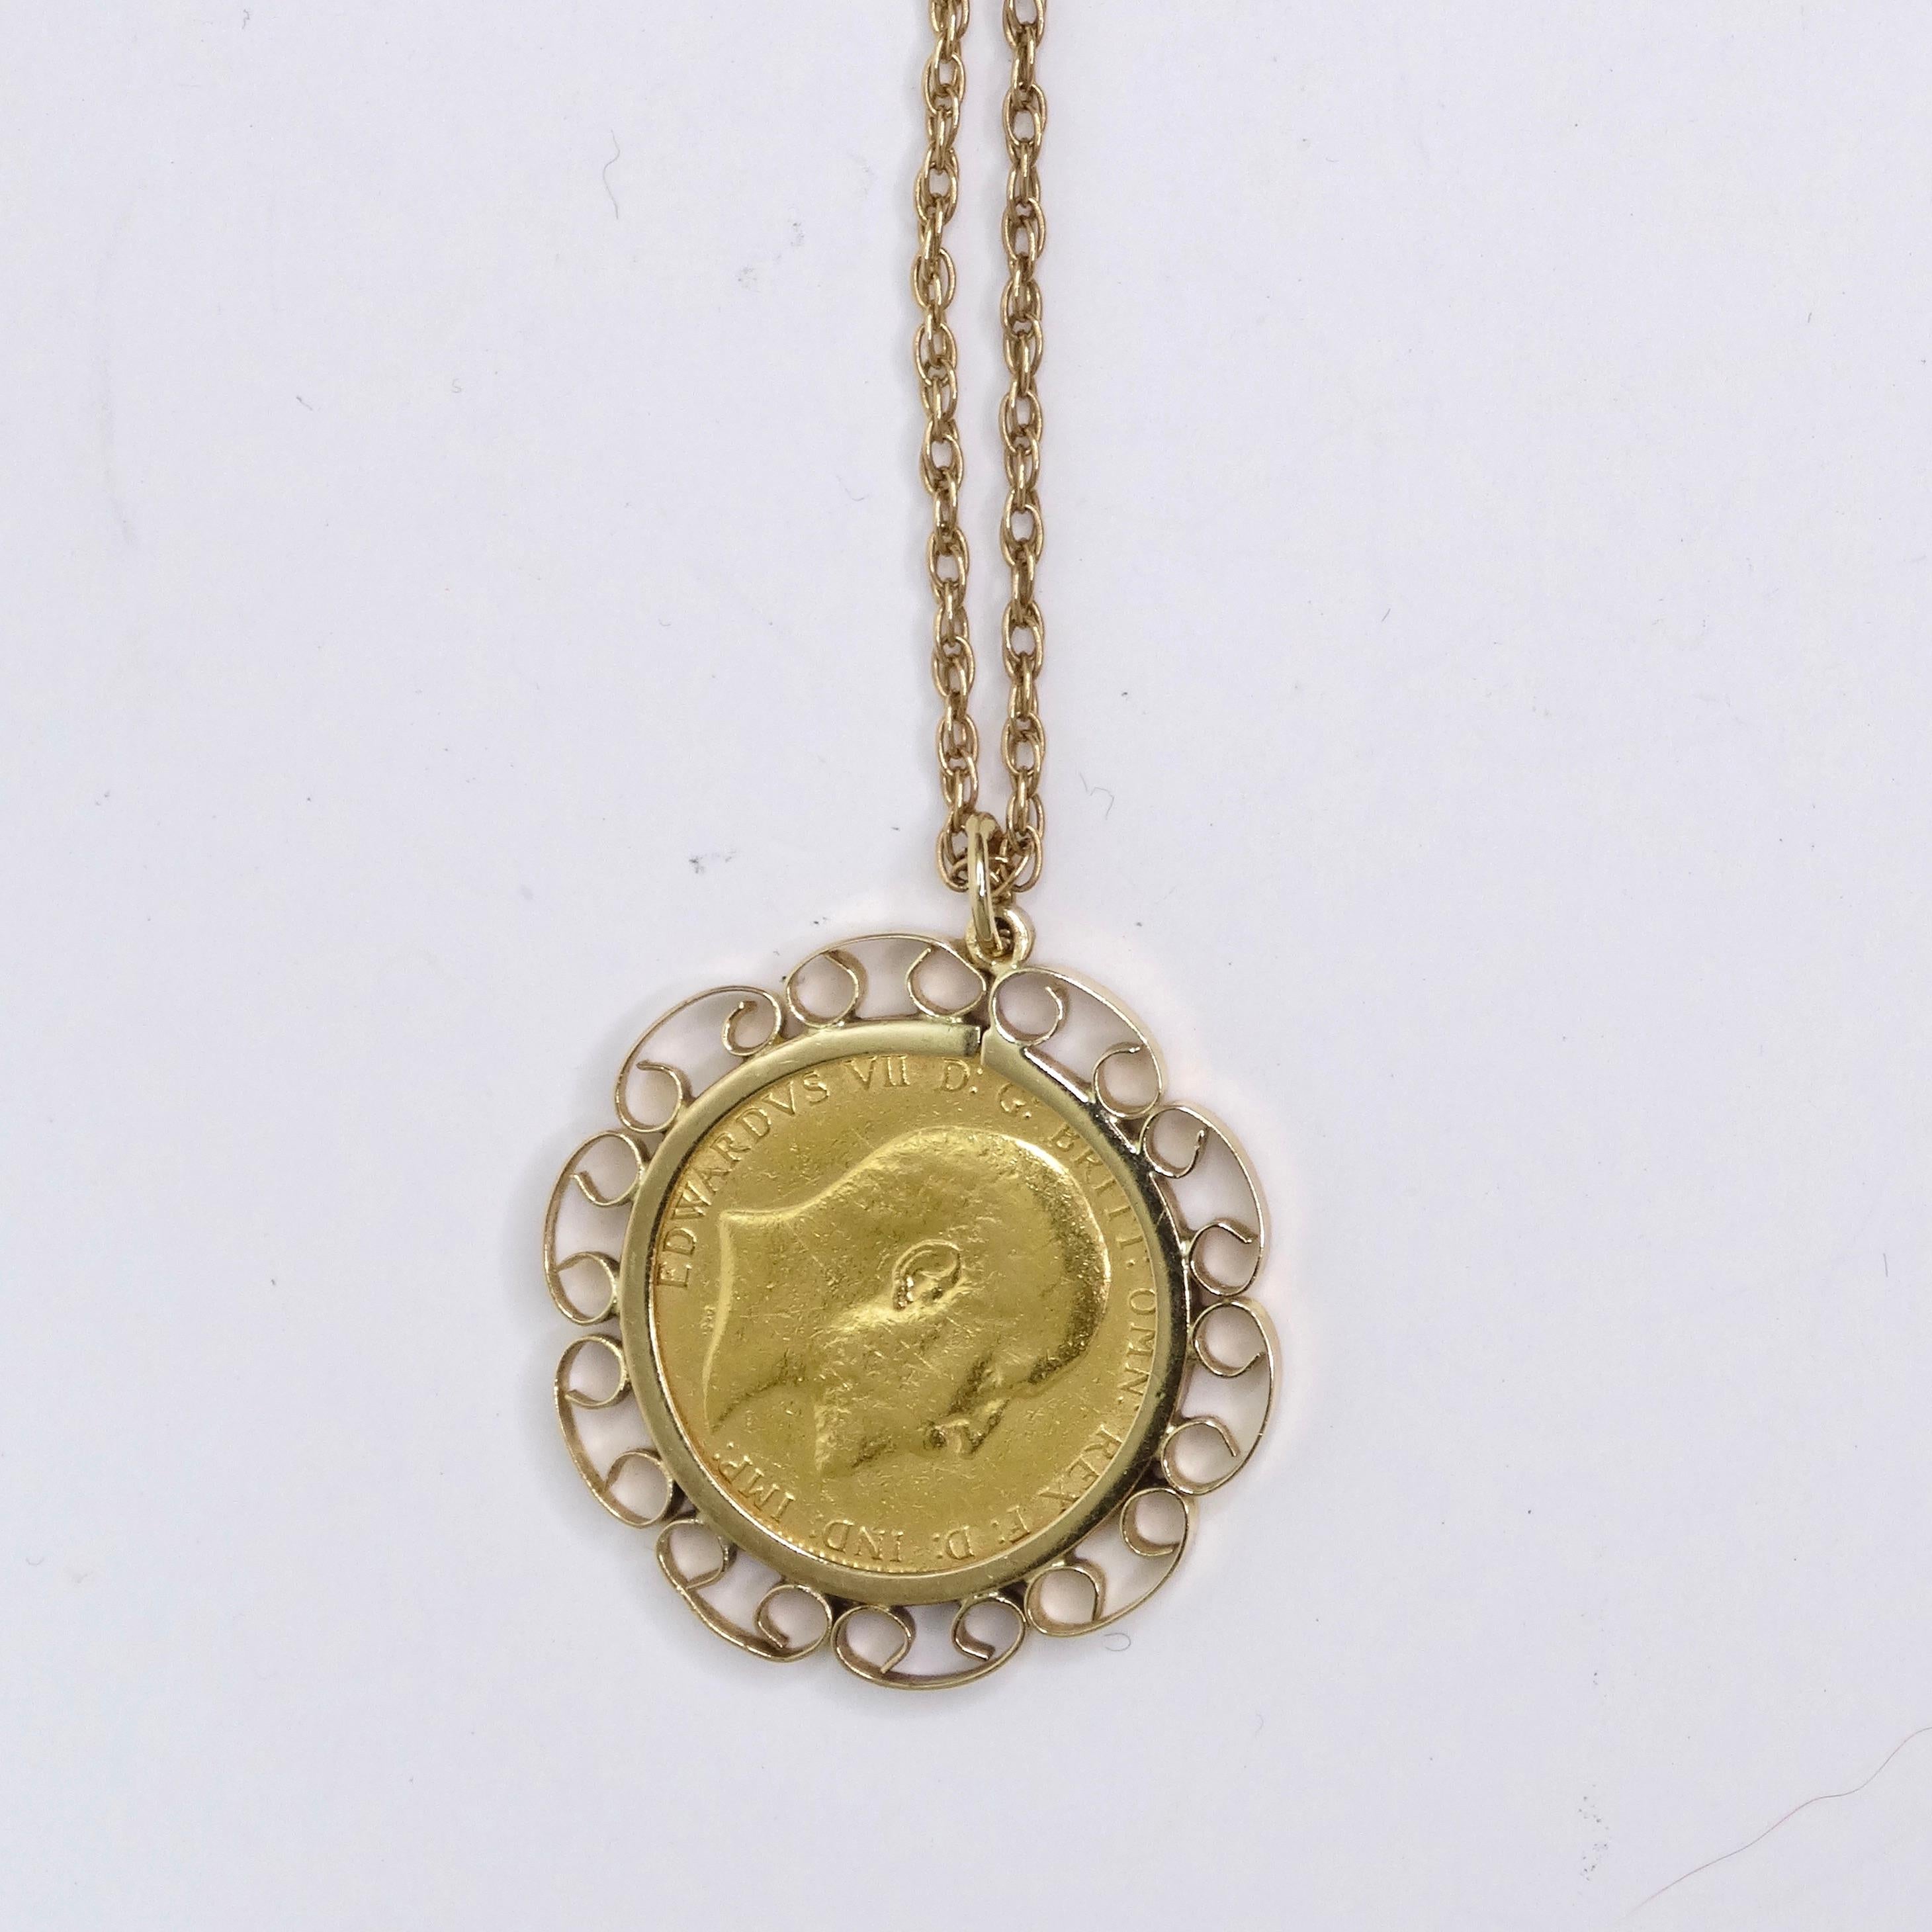 Coin Solid Gold King Edward Vll Necklace For Sale 2